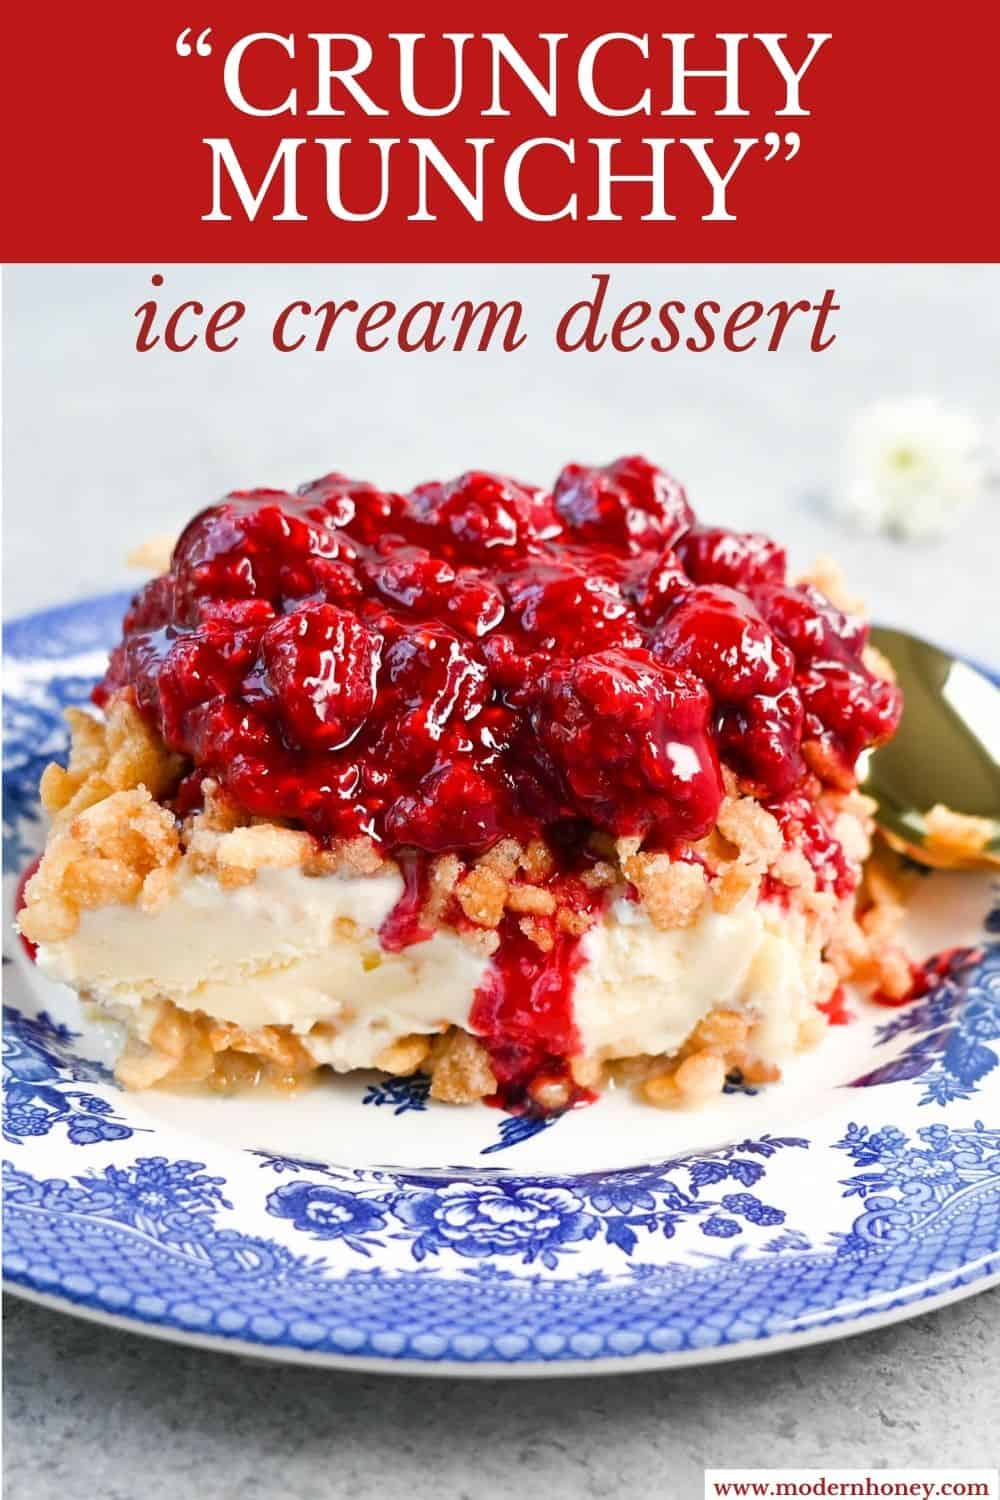 Crunchy Munchy Ice Cream Dessert. This popular ice cream dessert has a crunchy topping made with browned butter, sugar, and Rice Krispies cereal and is layered between vanilla ice cream and topped with a homemade raspberry sauce. The best ice cream dessert recipe!